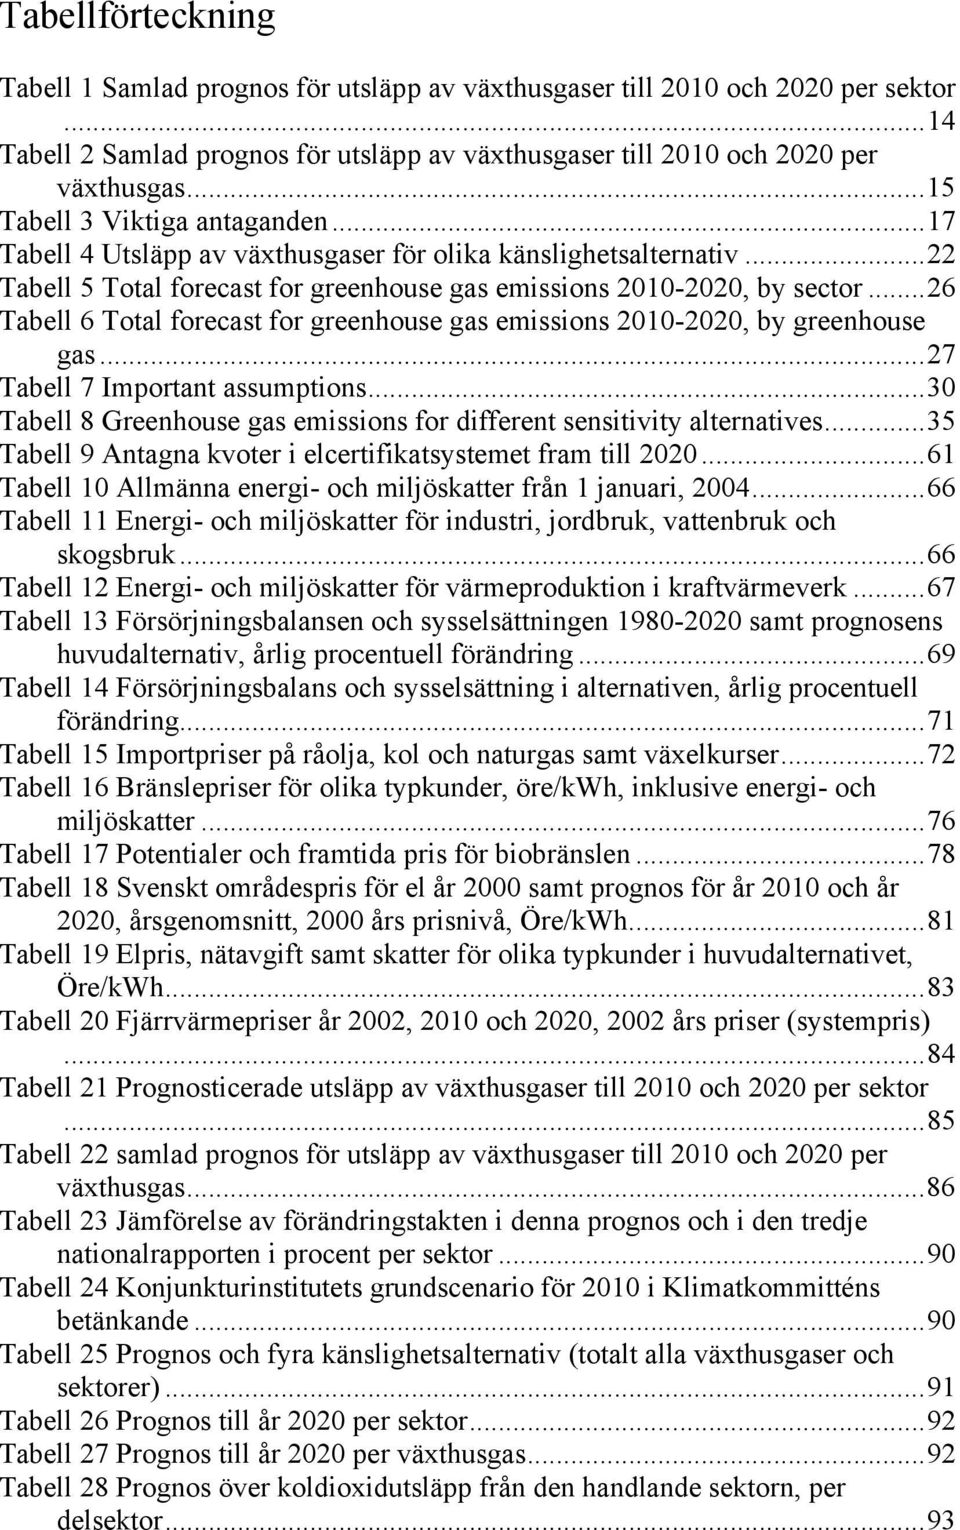 ..26 Tabell 6 Total forecast for greenhouse gas emissions 2010-2020, by greenhouse gas...27 Tabell 7 Important assumptions...30 Tabell 8 Greenhouse gas emissions for different sensitivity alternatives.